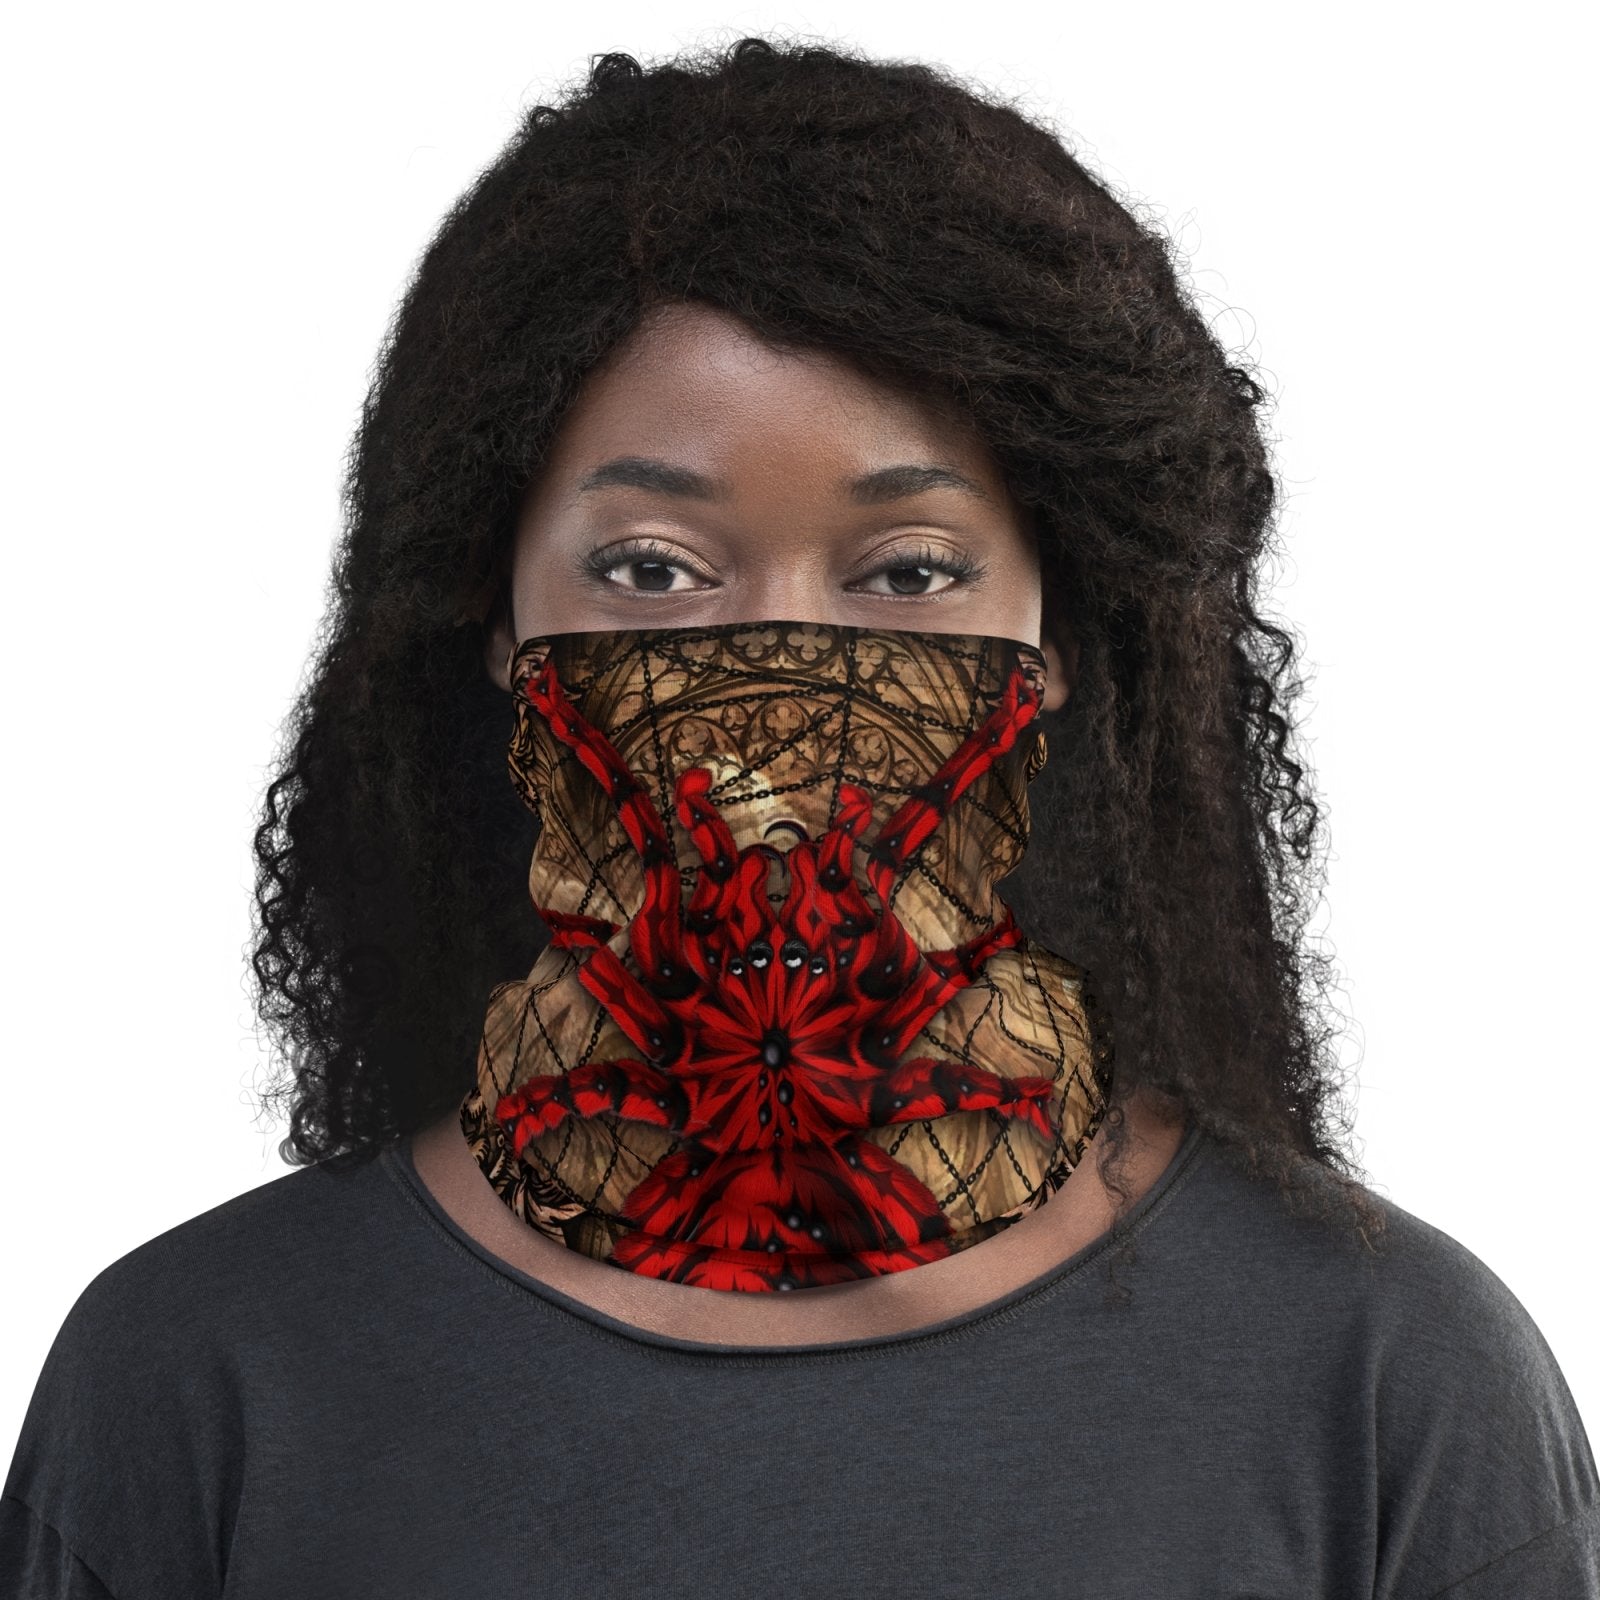 Gothic Neck Gaiter, Face Mask, Head Covering, Halloween Outfit, Tarantula Lover Gift - Goth Horror, Red Spider, Beige - Abysm Internal